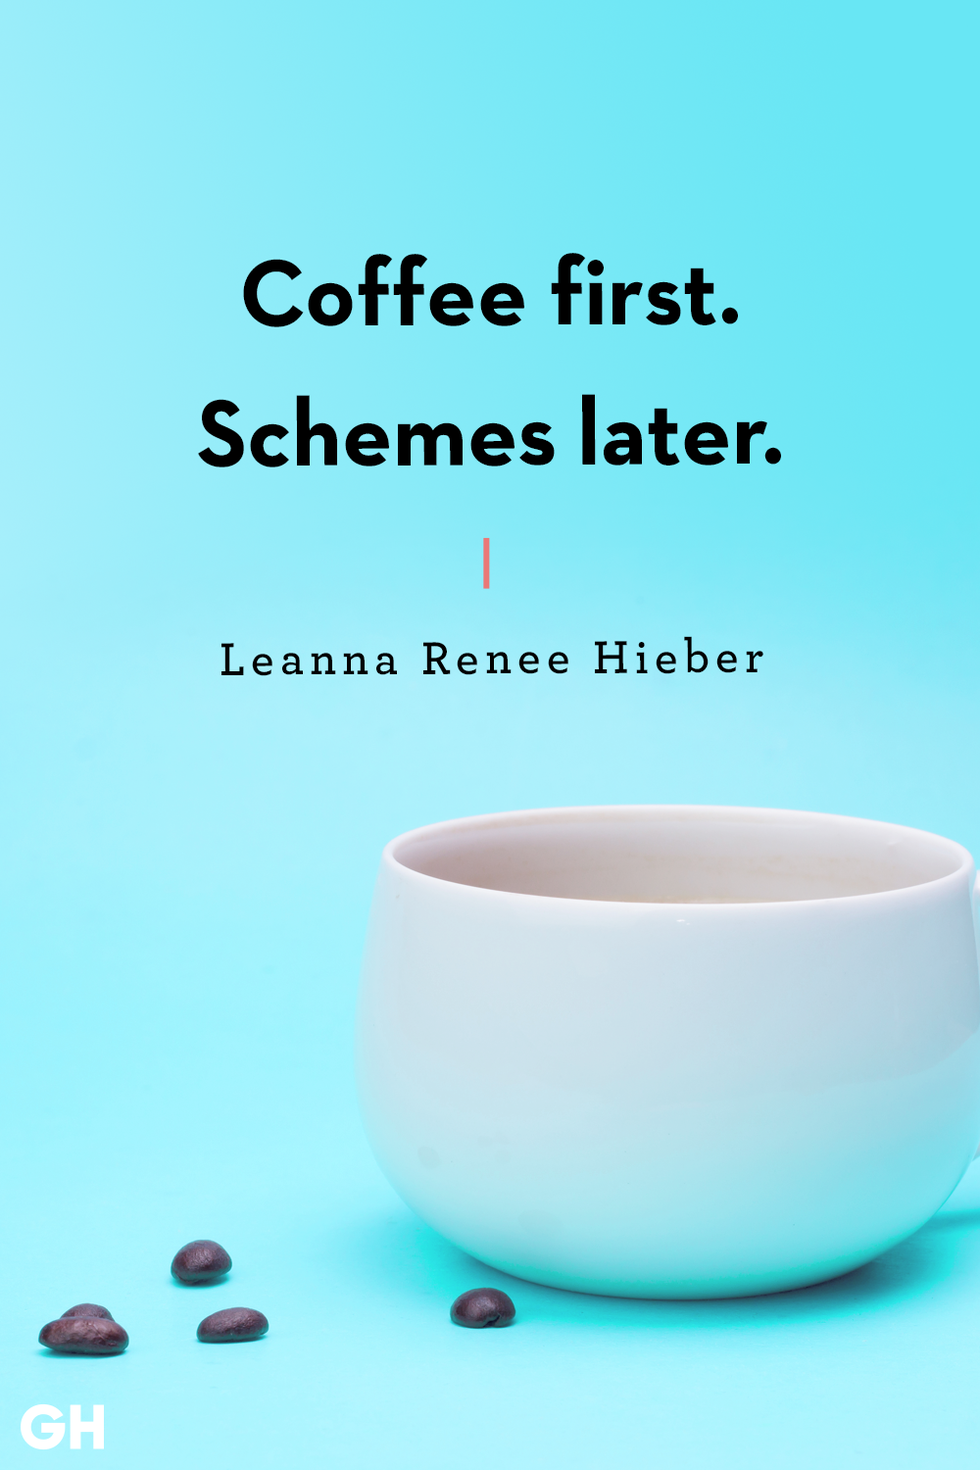 https://hips.hearstapps.com/hmg-prod/images/funny-coffee-quotes-leanna-renee-hieber-1557861125.png?crop=1xw:1xh;center,top&resize=980:*